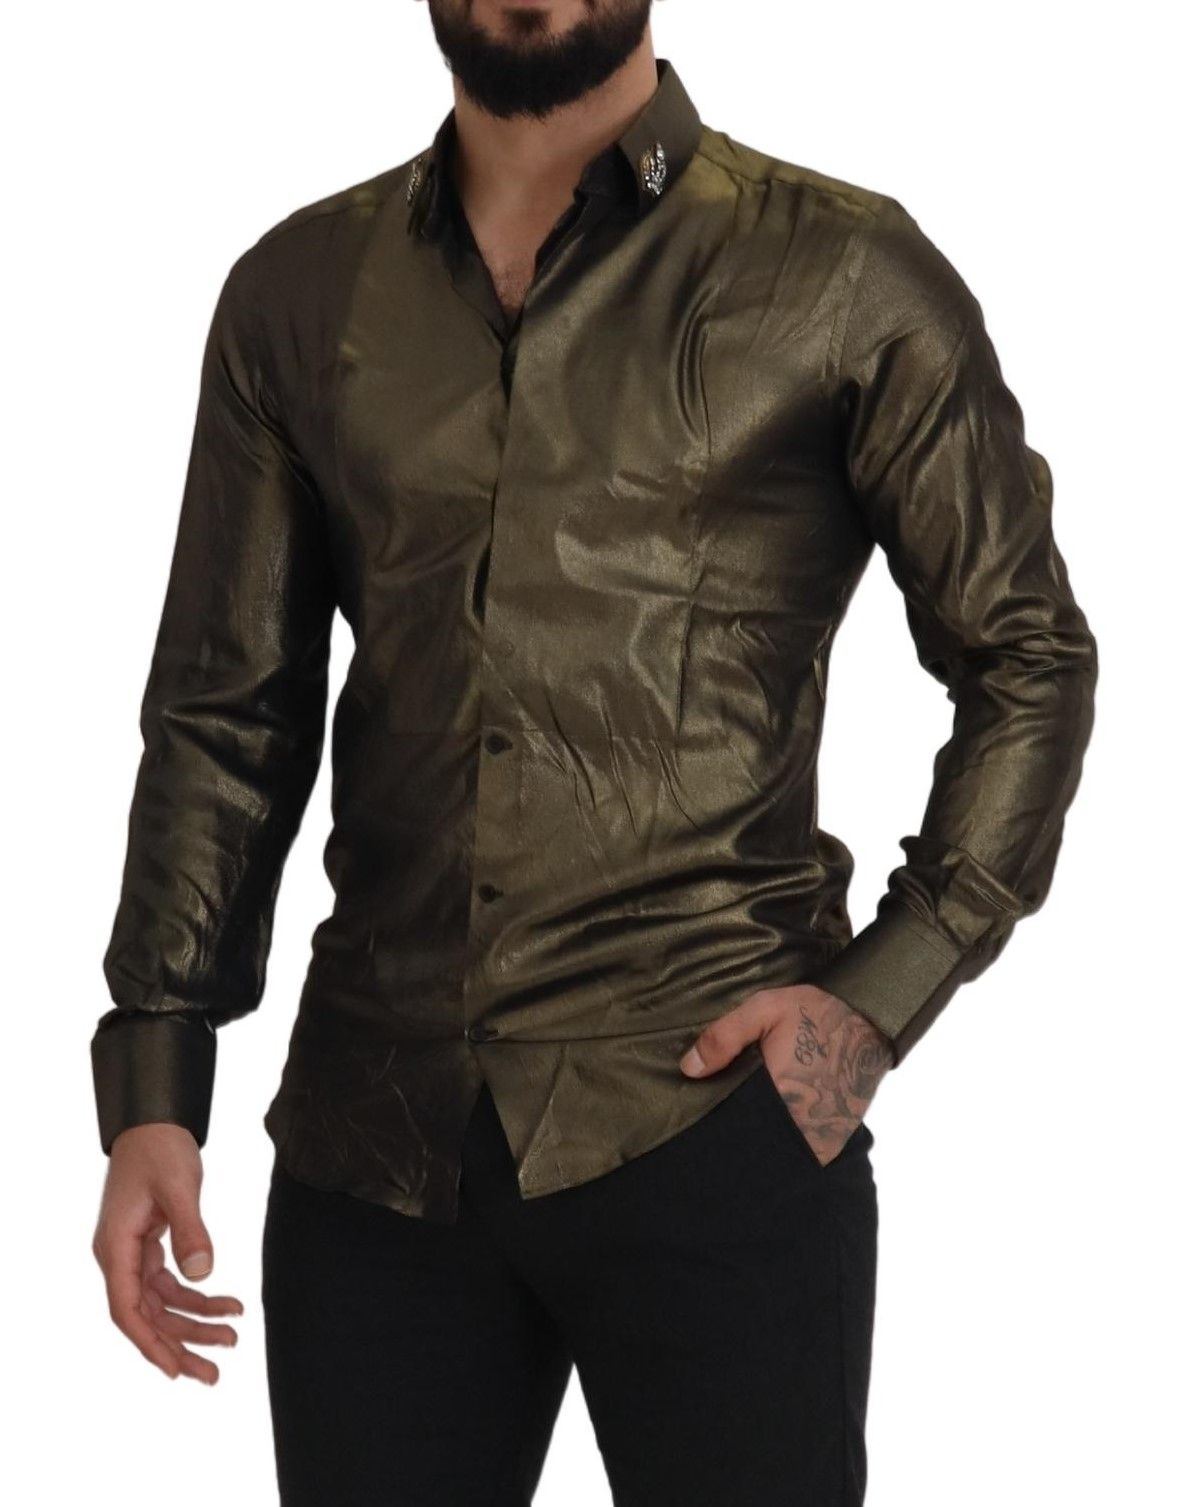 Elegant Gold Slim Fit Shirt with Crown Embroidery